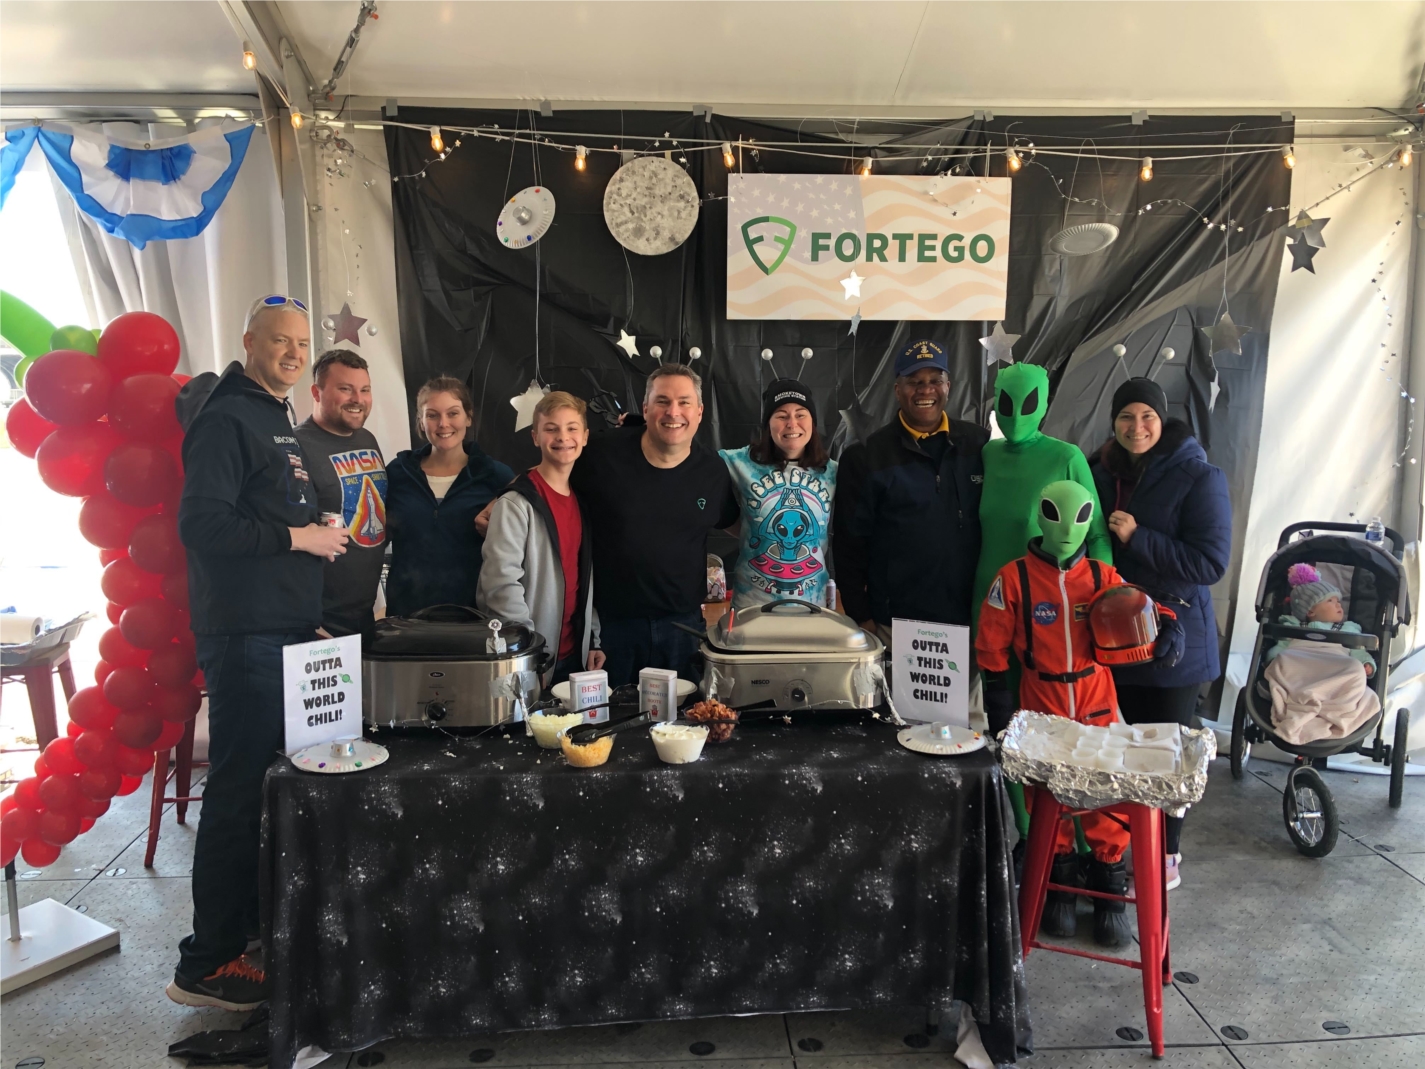 The Fortego Family volunteers regularly in the community and our company giving program seeks to support causes that have special meaning for our team. We are a longtime partner of The Baltimore Station and their veterans and homeless men, and we participate in activities like their annual Chili Cook-Off every year.